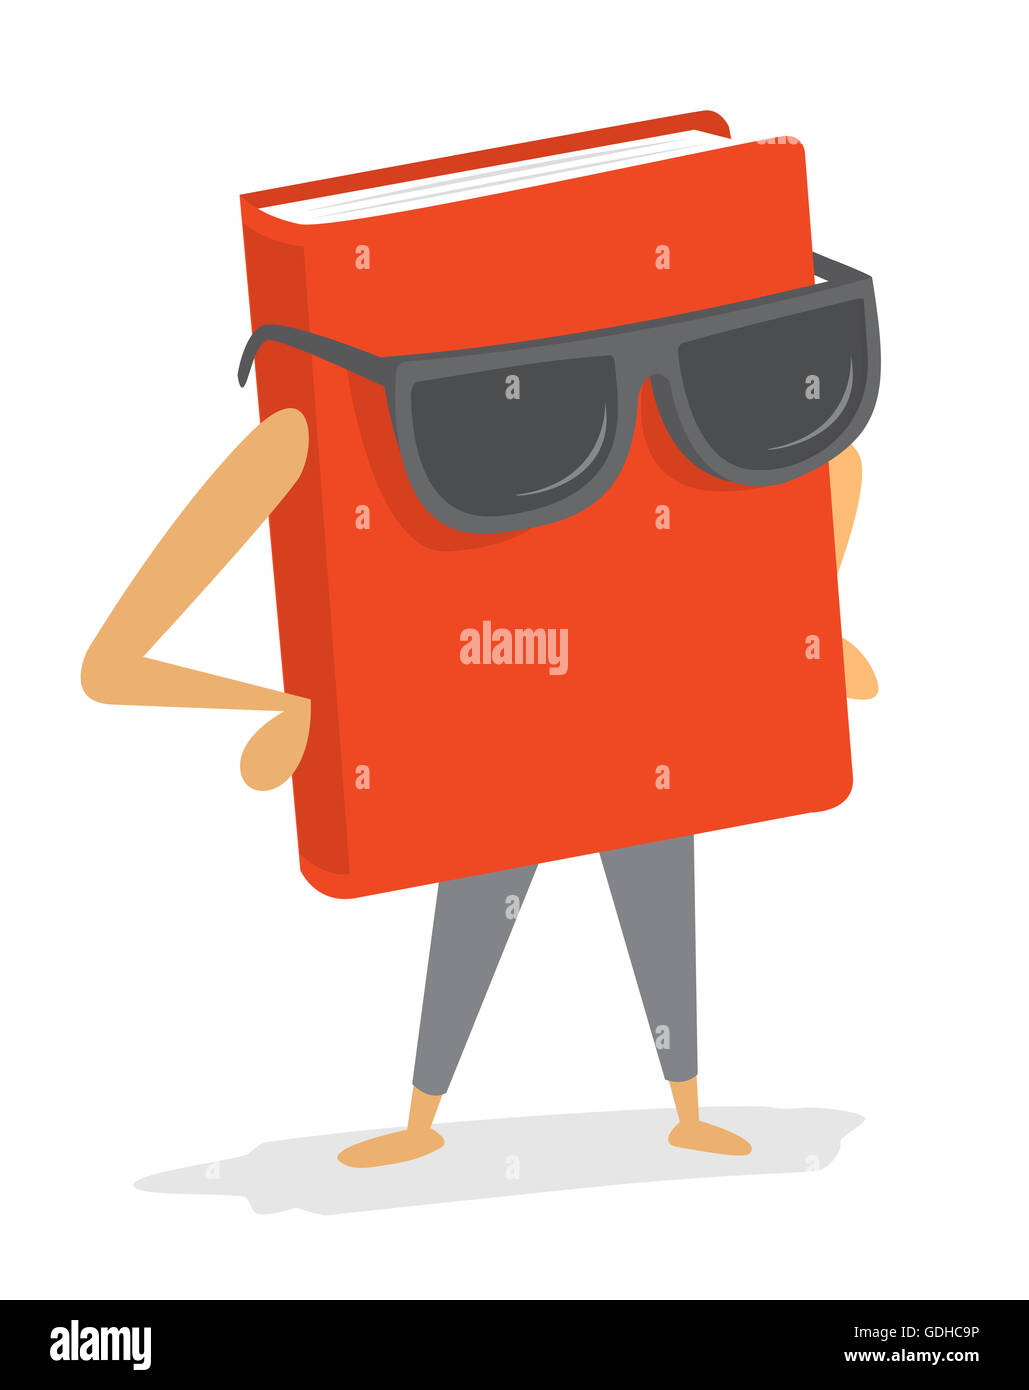 Cartoon illustration of cool red book or best seller wearing sunglasses Stock Photo